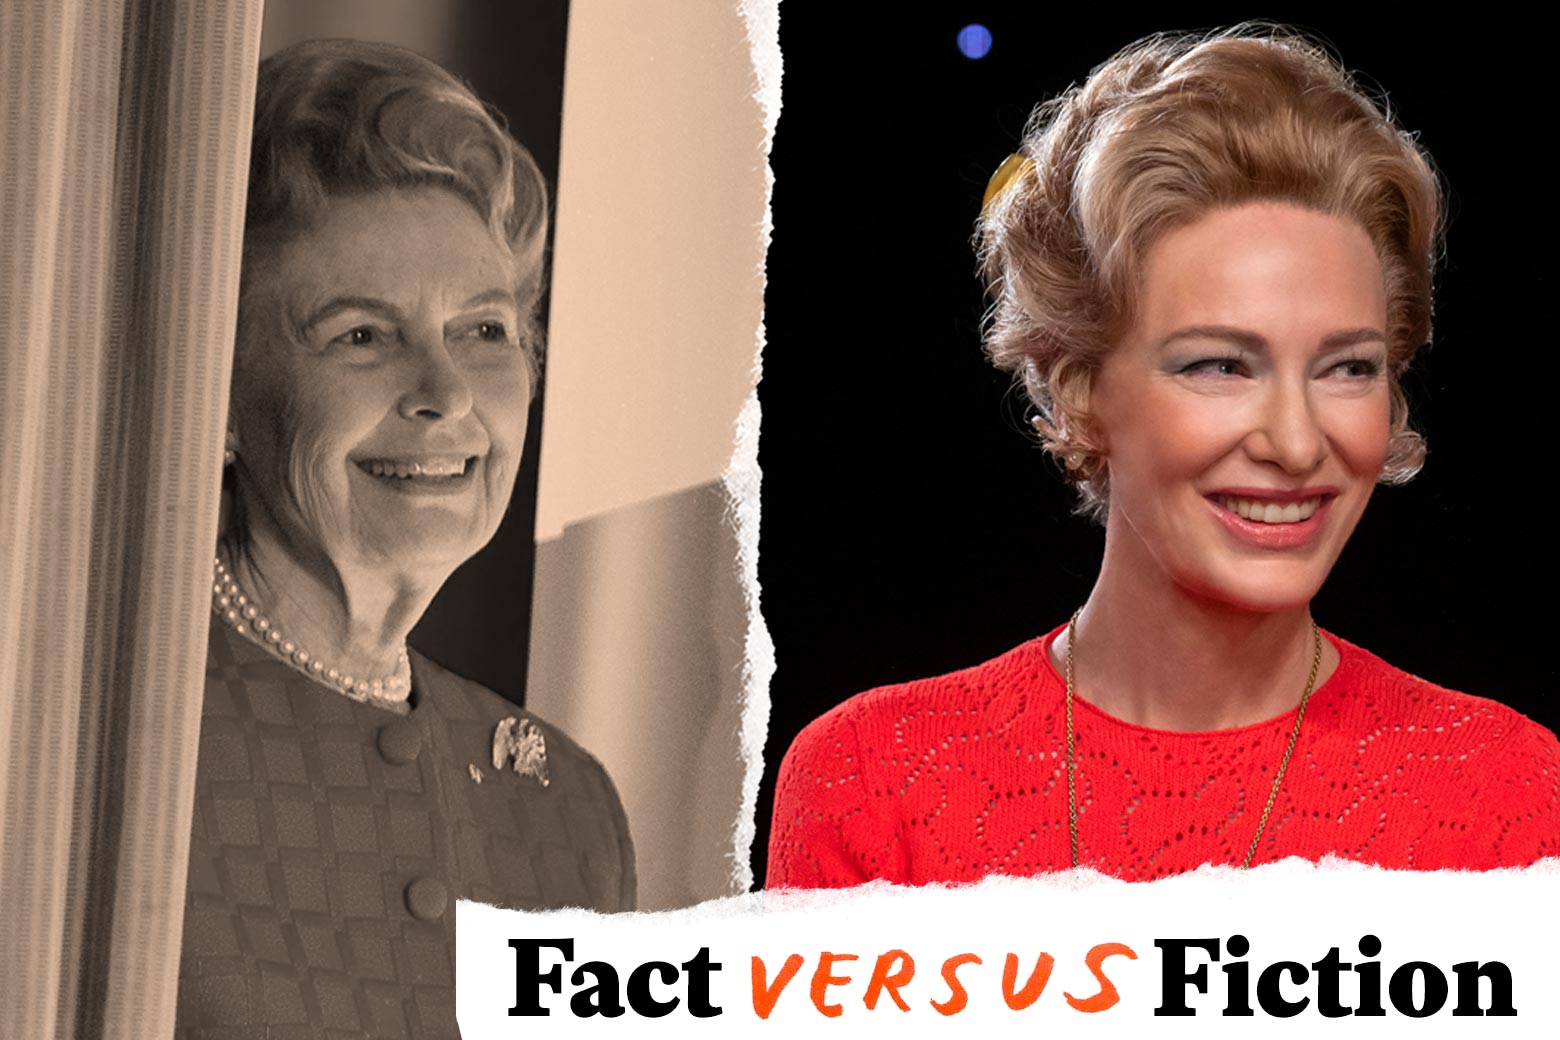 A black and white photograph of the real Phyllis Schlafly wearing pearls and smiling set beside a color image of Cate Blanchett portraying Schlafly, also smiling. The likeness between the two women is uncanny.